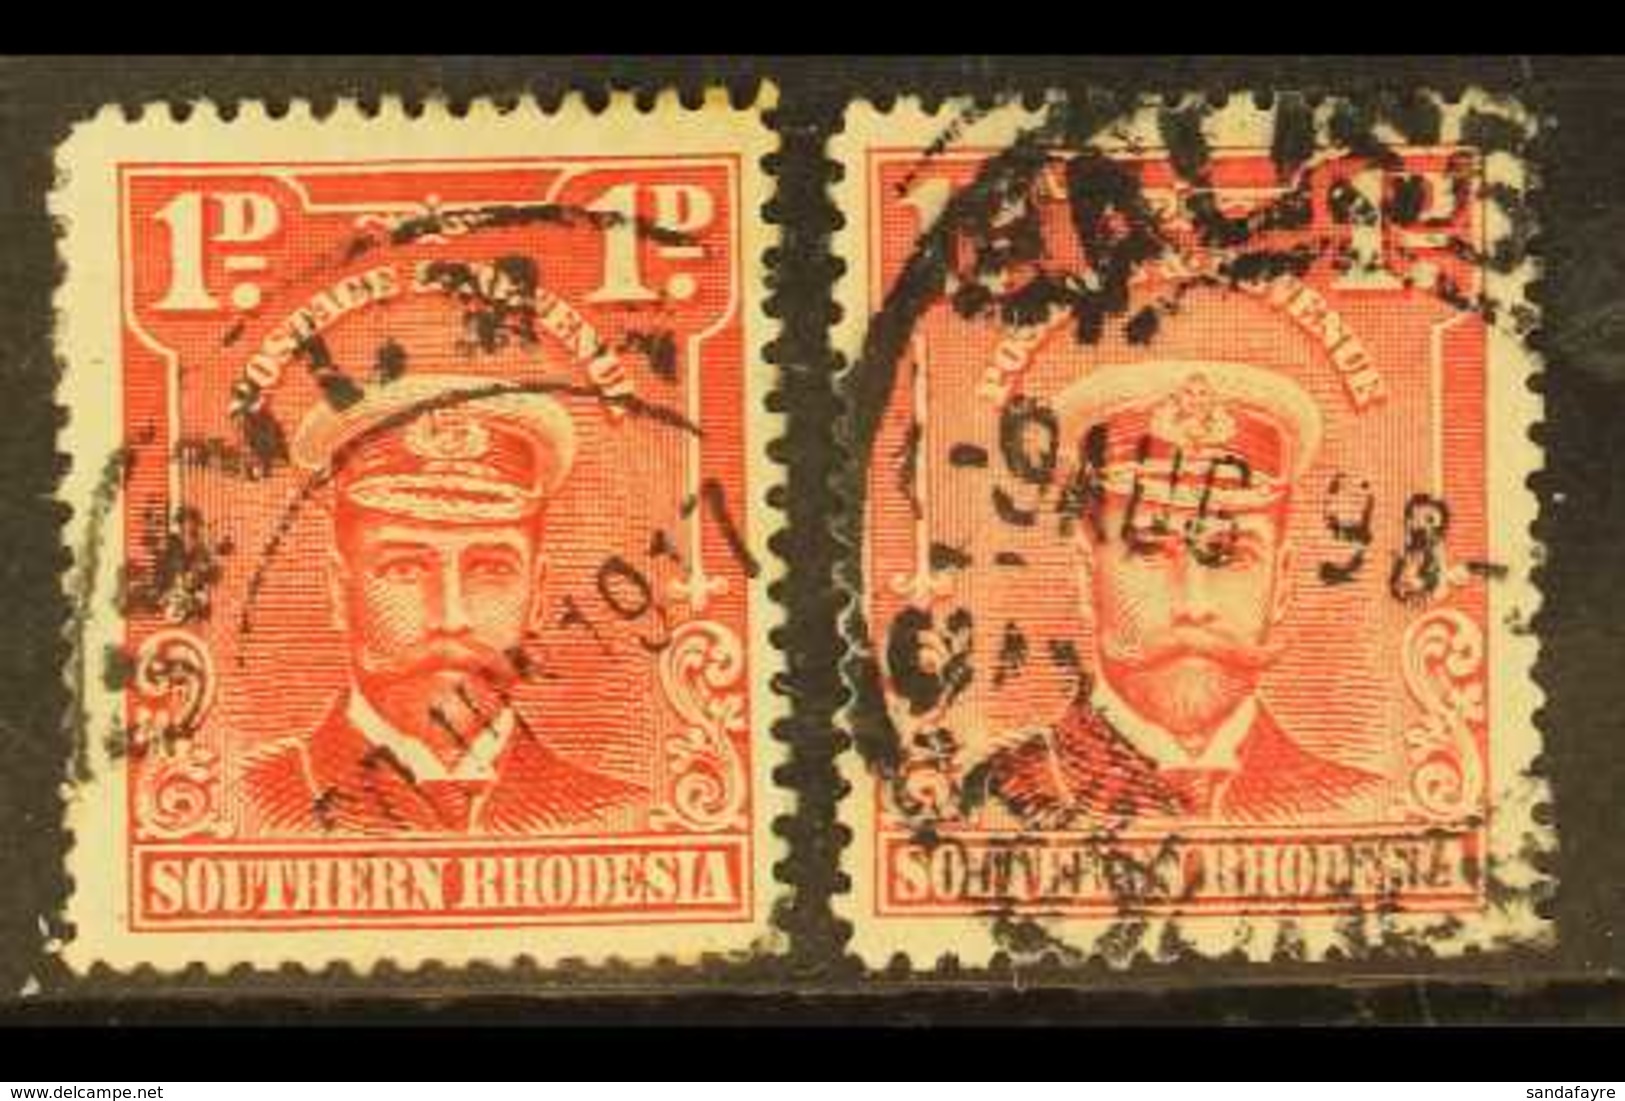 1924 CANCELLATION ERRORS Two 1d Bright Rose Stamps, SG 2, One With "1917" Year Date, The Other With "-9 AUG 98" Date (2) - Südrhodesien (...-1964)